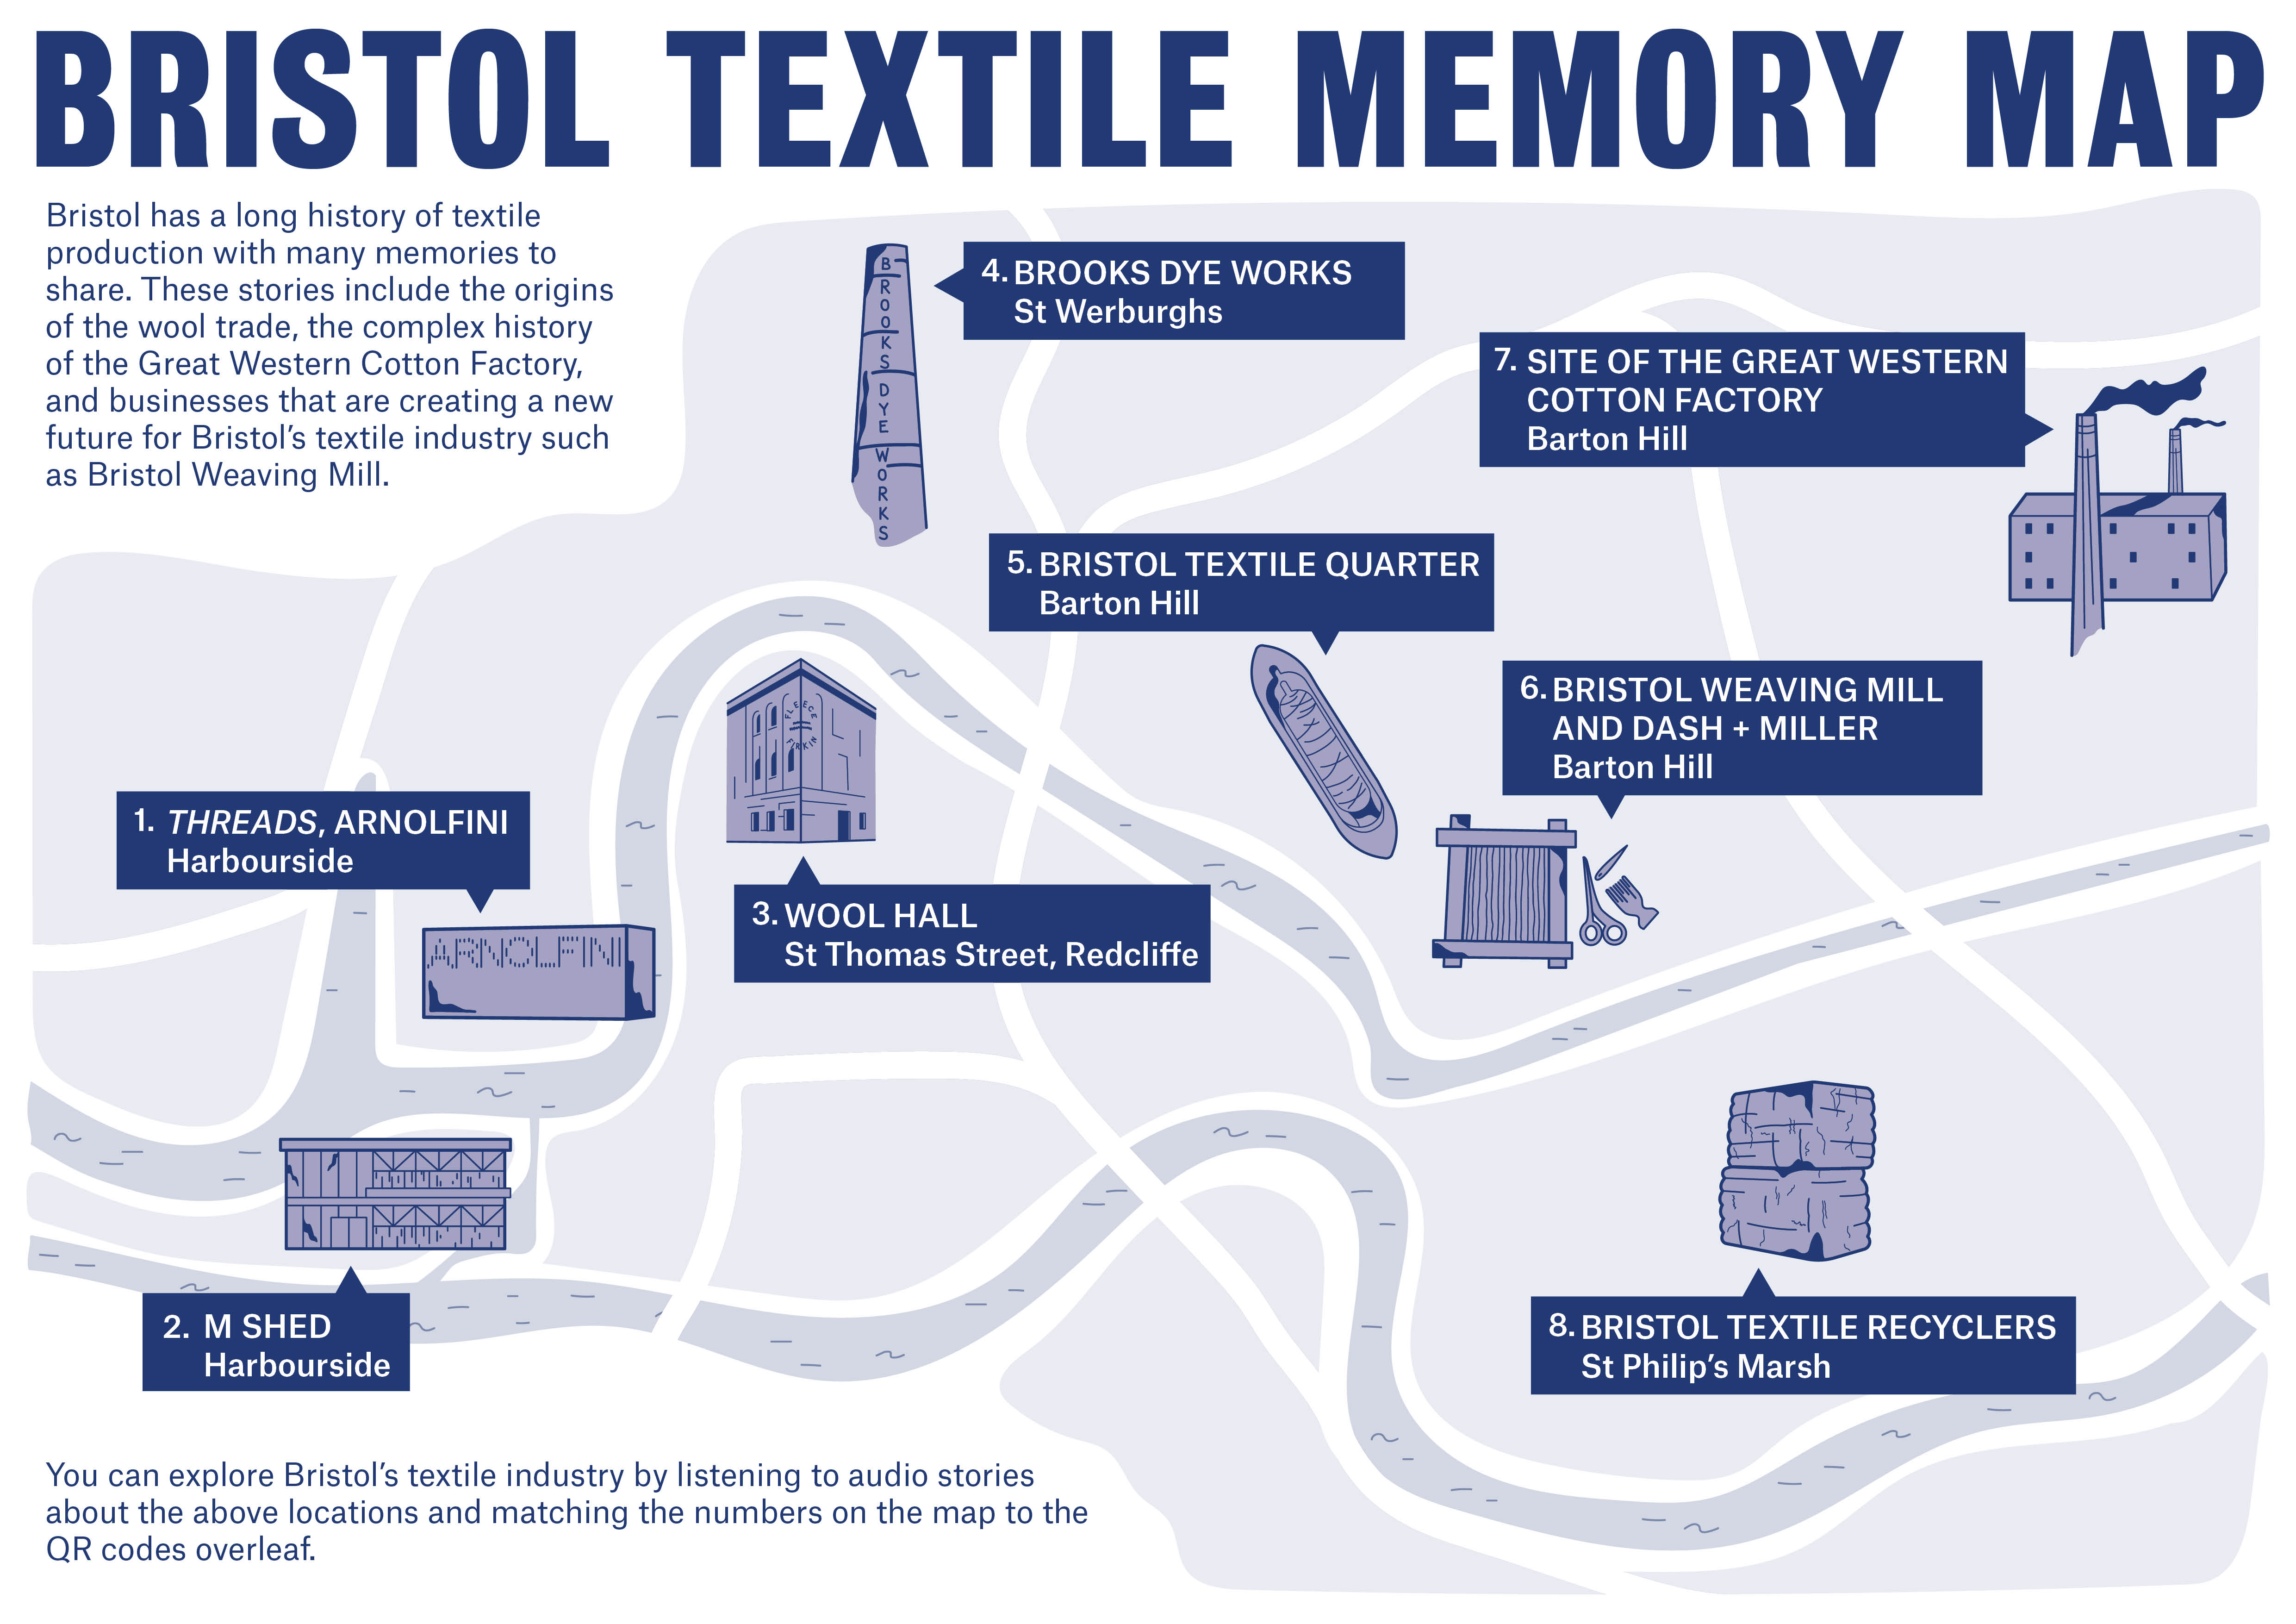 An illustration of the memory map, showing seven places in Bristol related to its long history of textiles production.